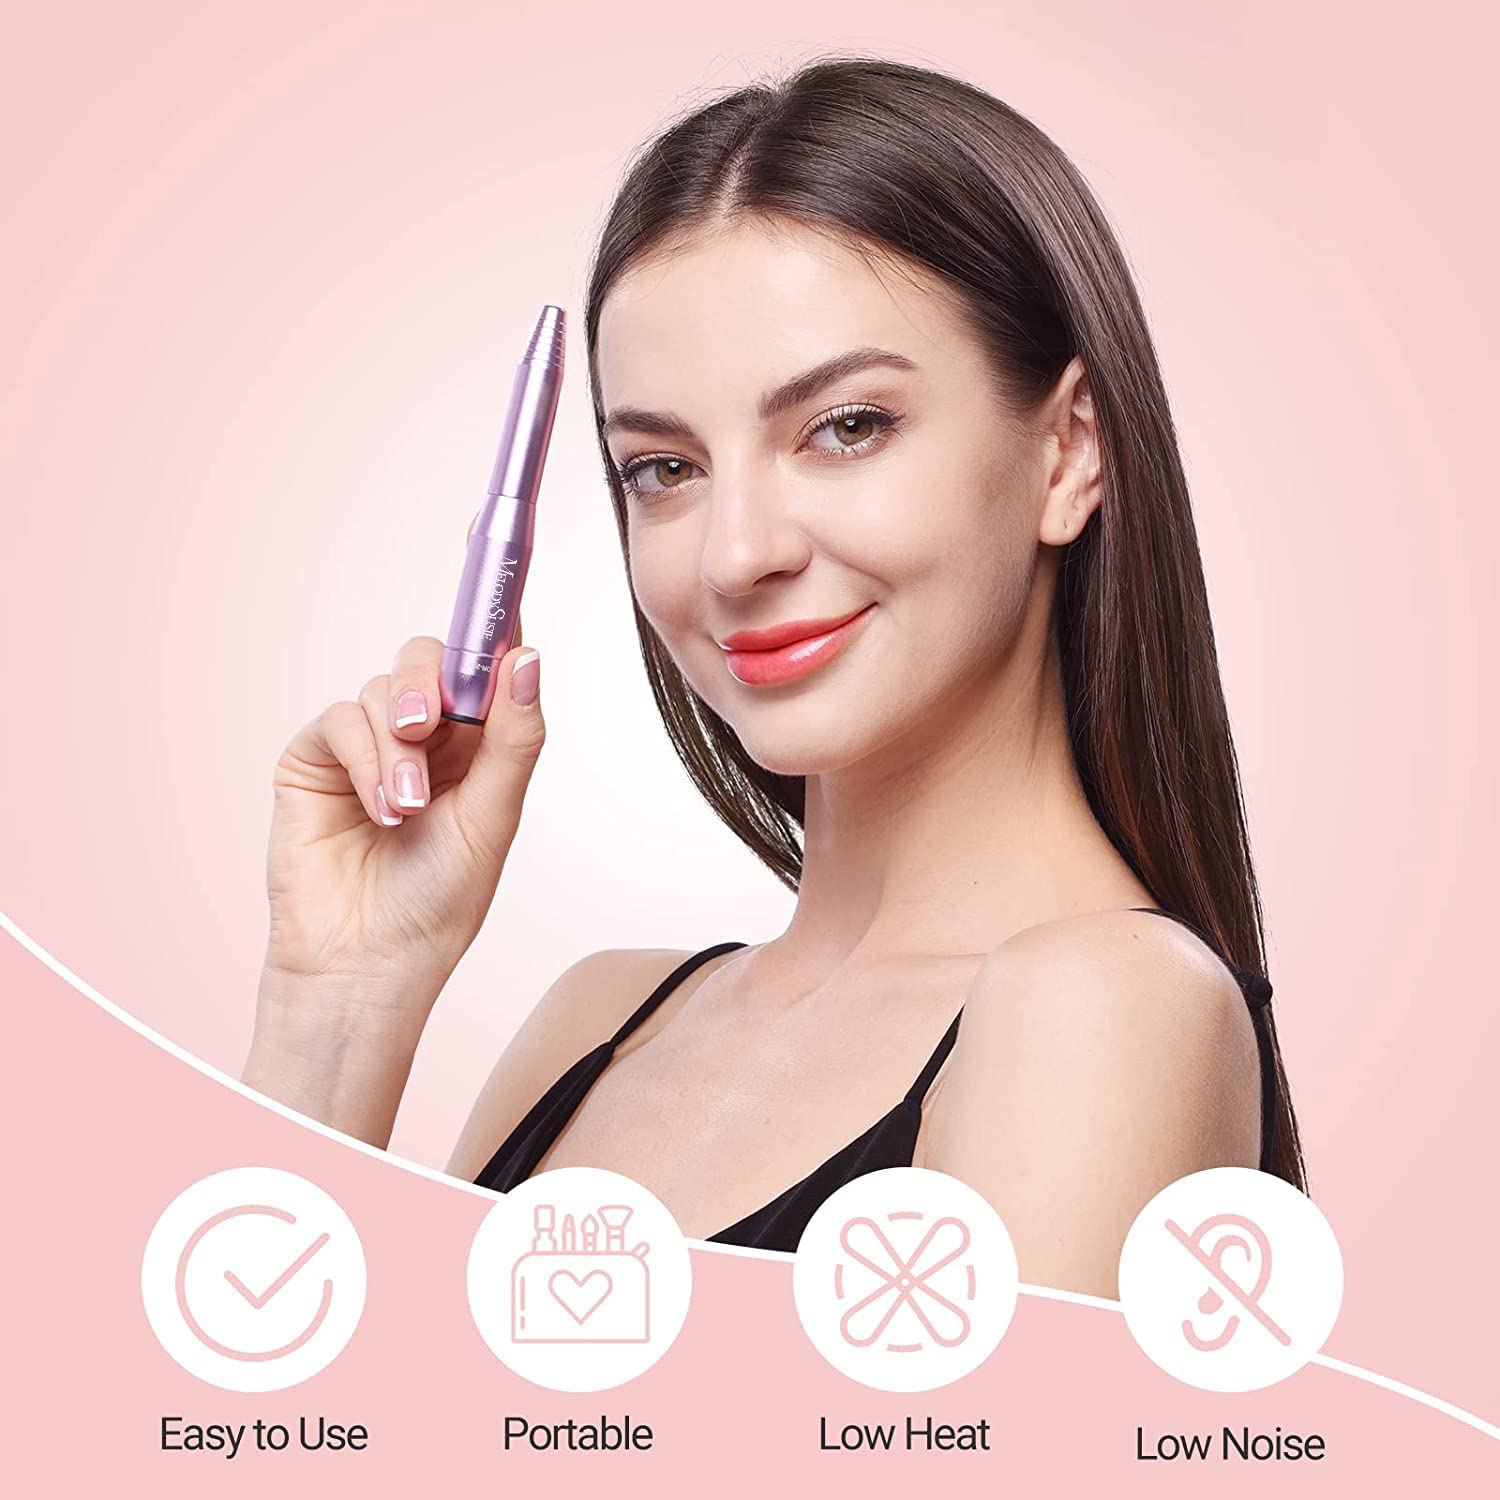 Portable Electric Nail Drill,Pc120B Compact Efile Electrical Professional Nail File Kit for Acrylic, Gel Nails, Manicure Pedicure Polishing Shape Tools Design for Home Salon Use, Purple